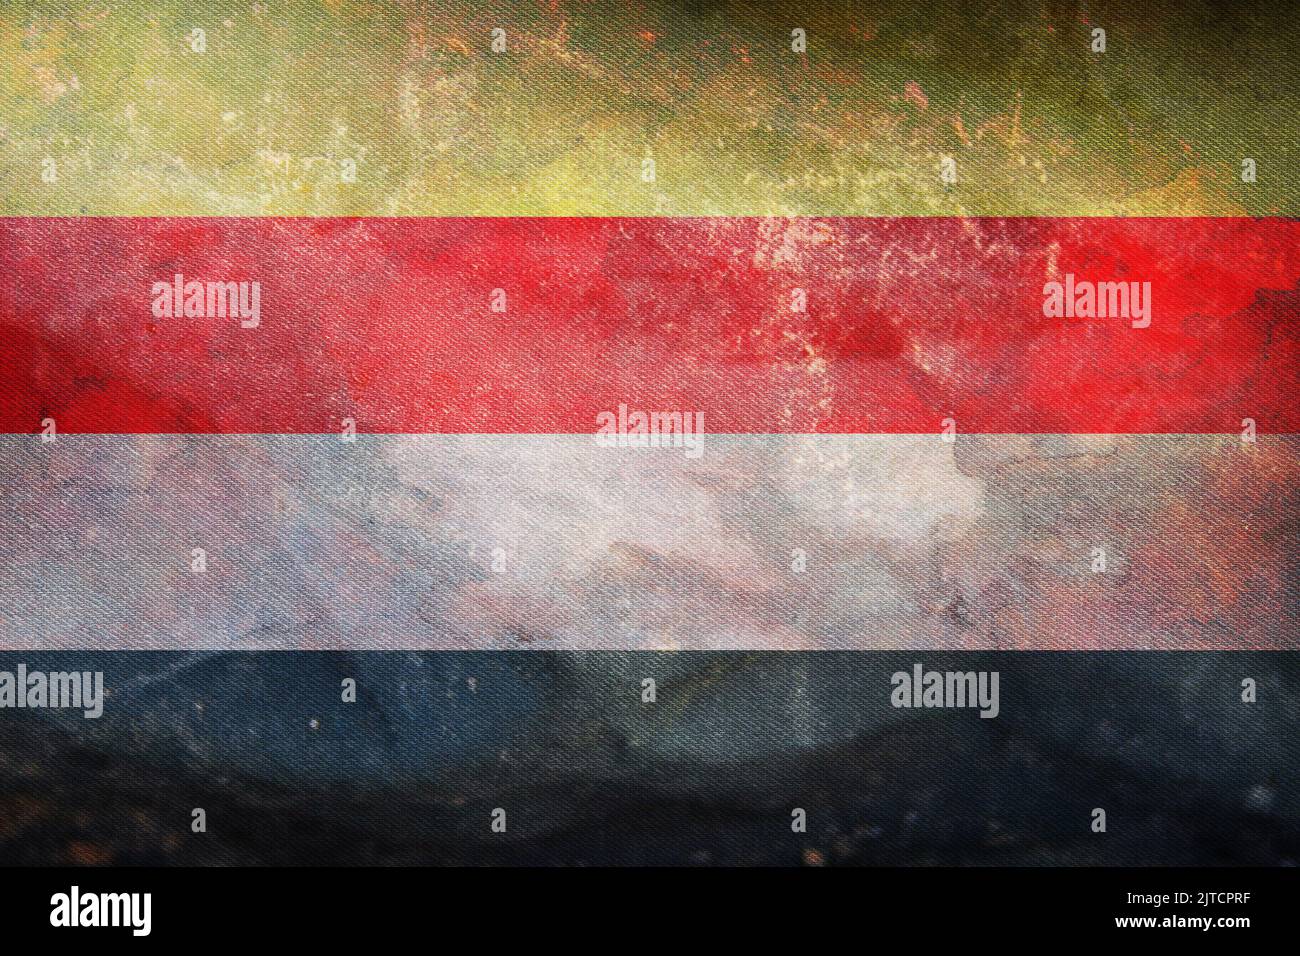 retro flag of Austronesian peoples Butonese people with grunge texture. flag representing ethnic group or culture, regional authorities. no flagpole. Stock Photo